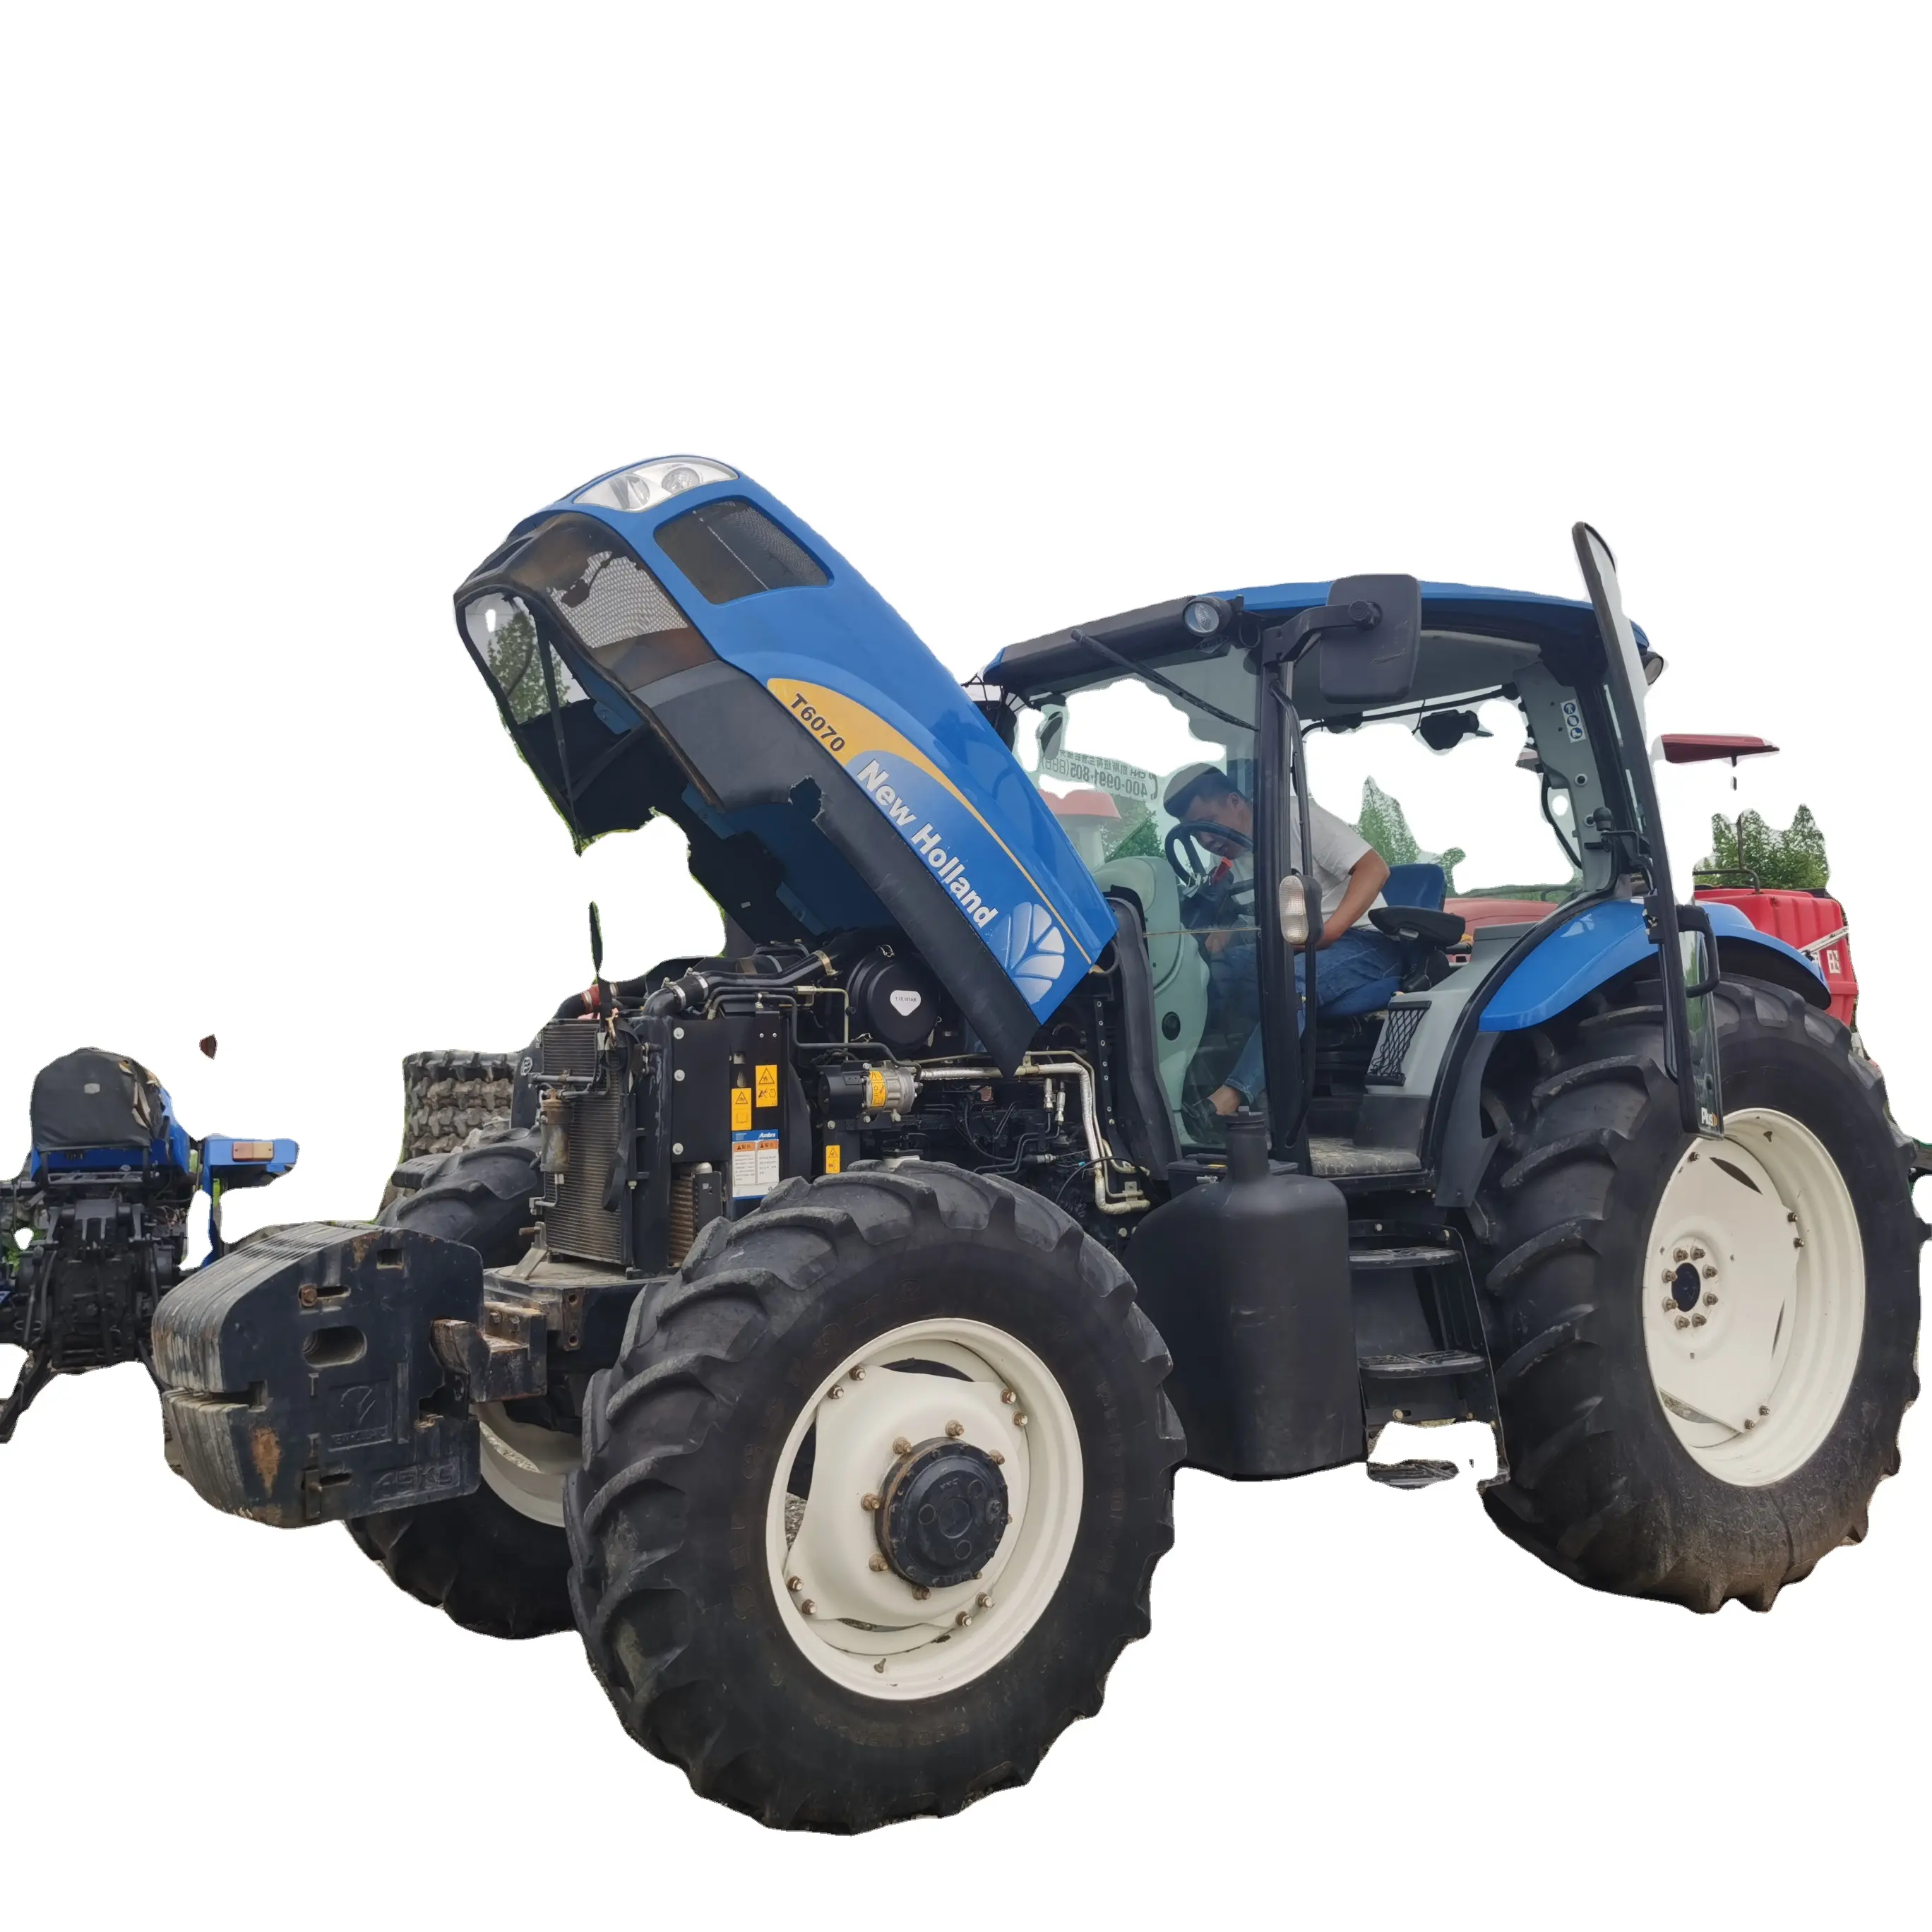 Nuovo trattore agricolo Hol land 120hp 4WD